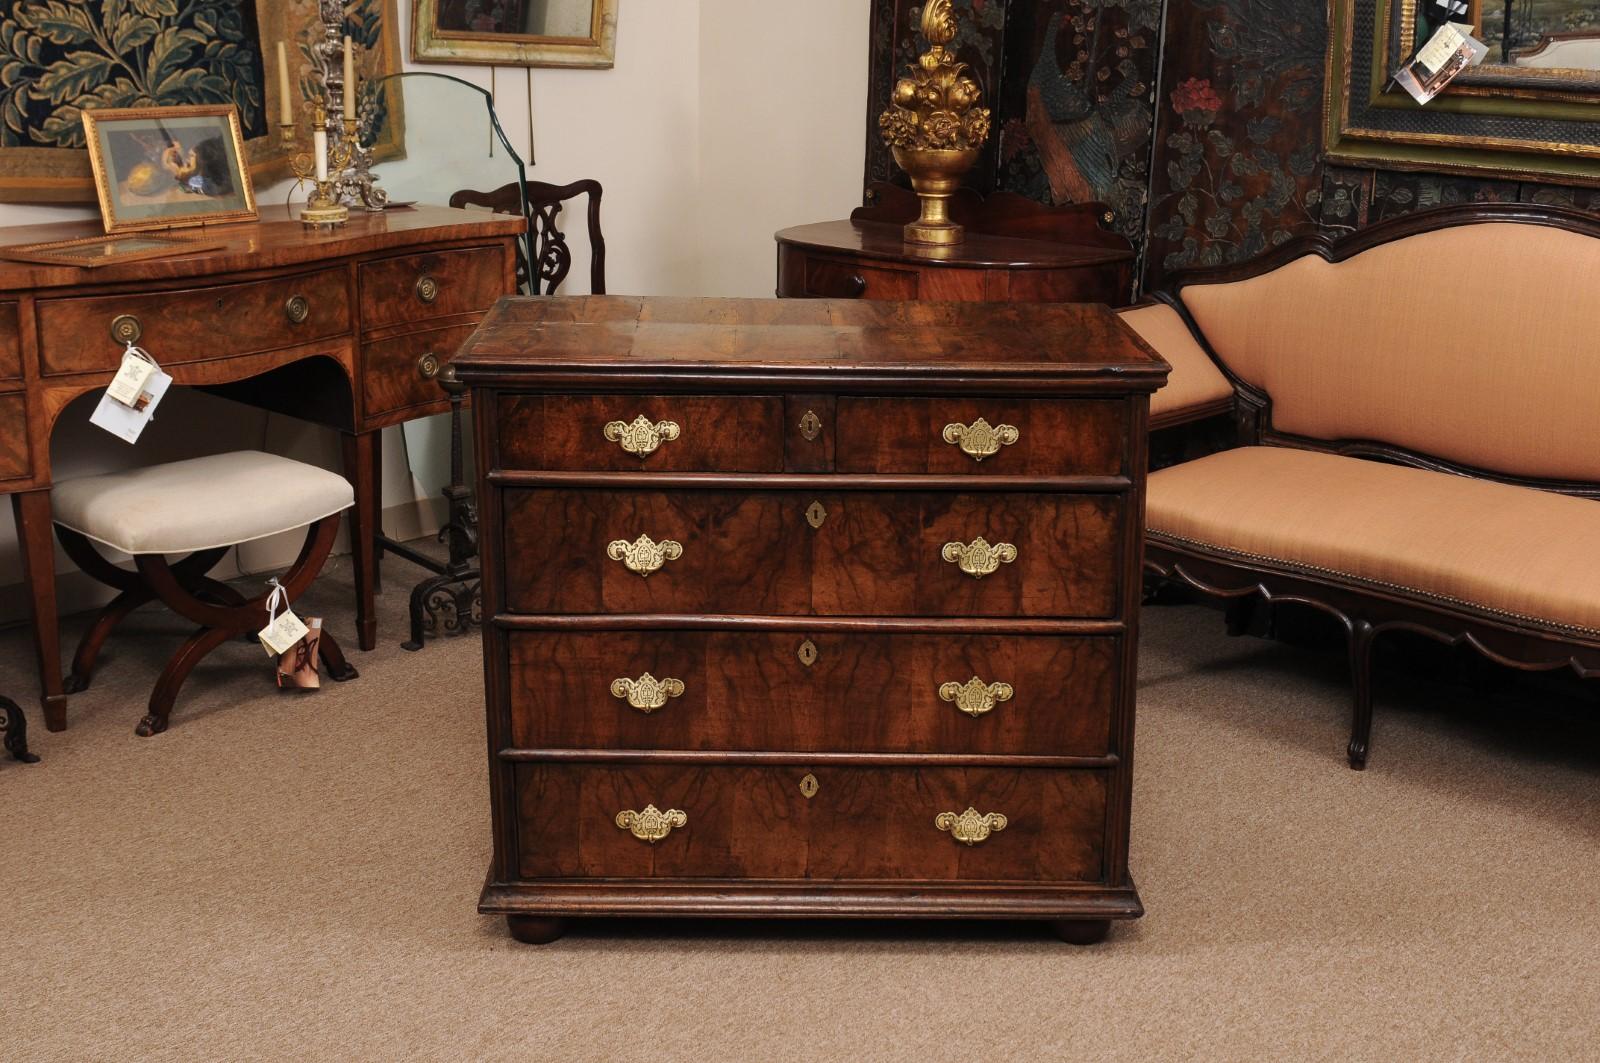 The English William & Mary chest in figured walnut with 2 short drawers above 3 long drawers terminating in bun feet. All the drawers with brass pulls and brass escutcheons.